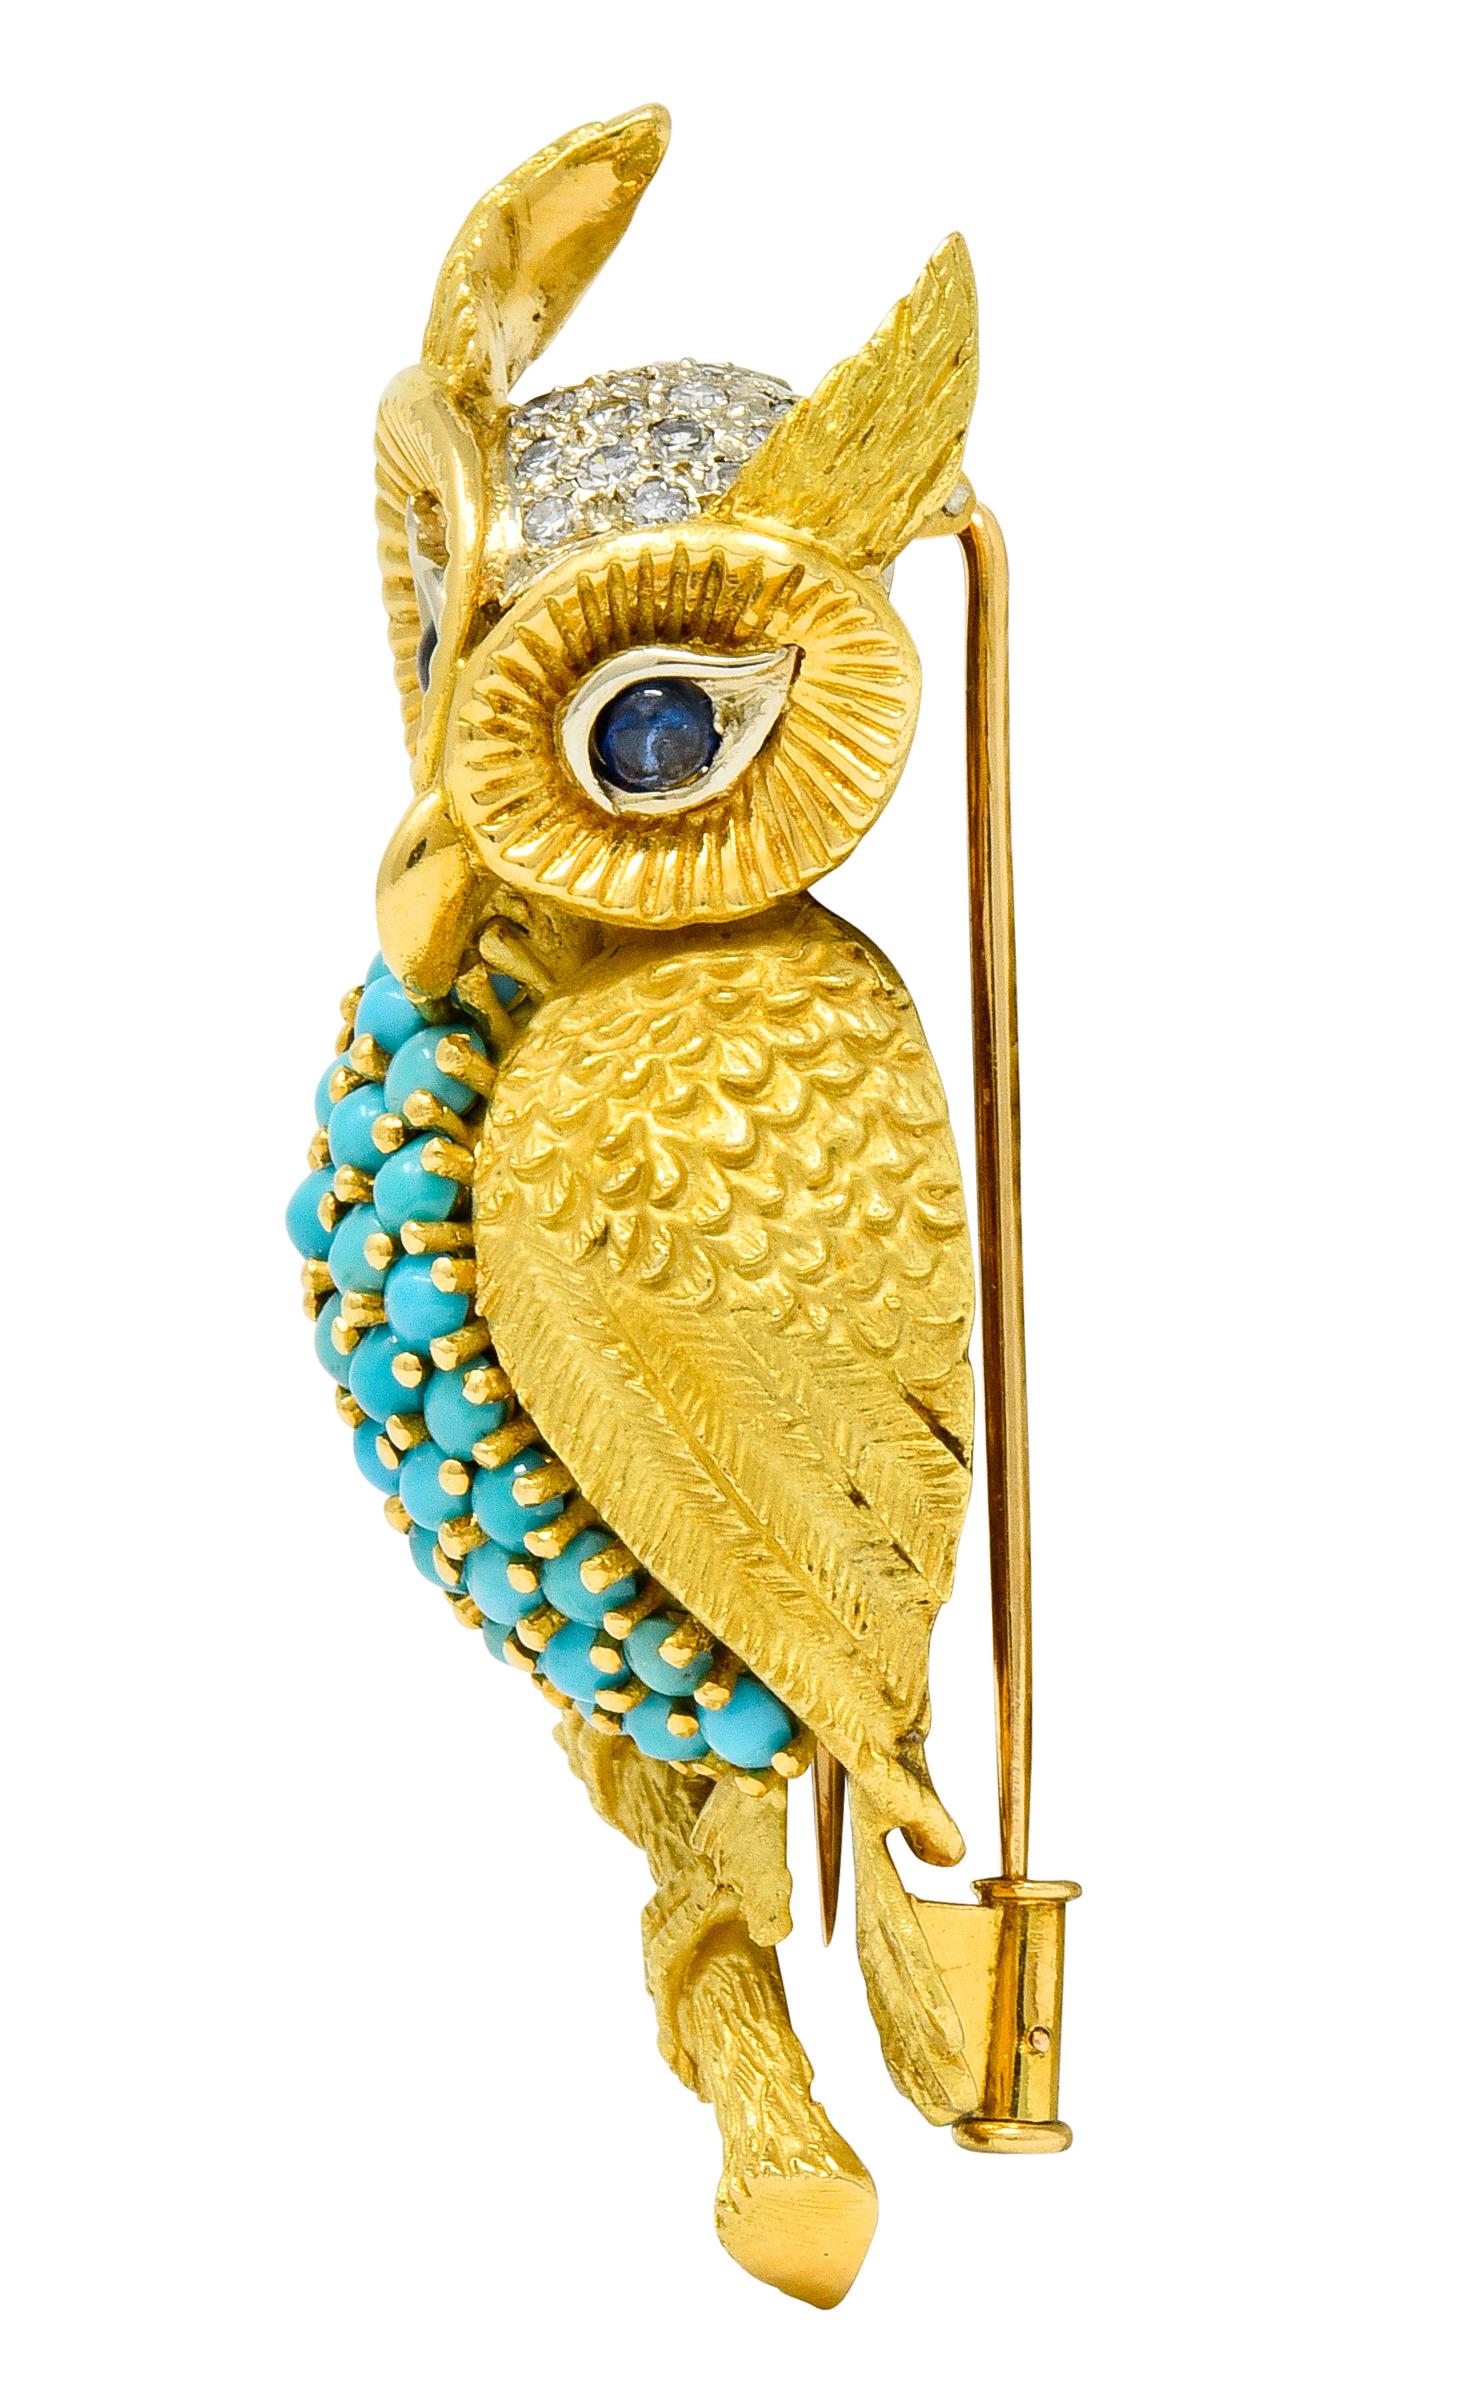 Brooch designed as a long-eared owl, perched on a branch, with a pavè diamond crown and piercing blue sapphire cabochon eyes

Single cut diamonds are bead set in white gold and weigh approximately 0.45 carat total, H/I color with SI